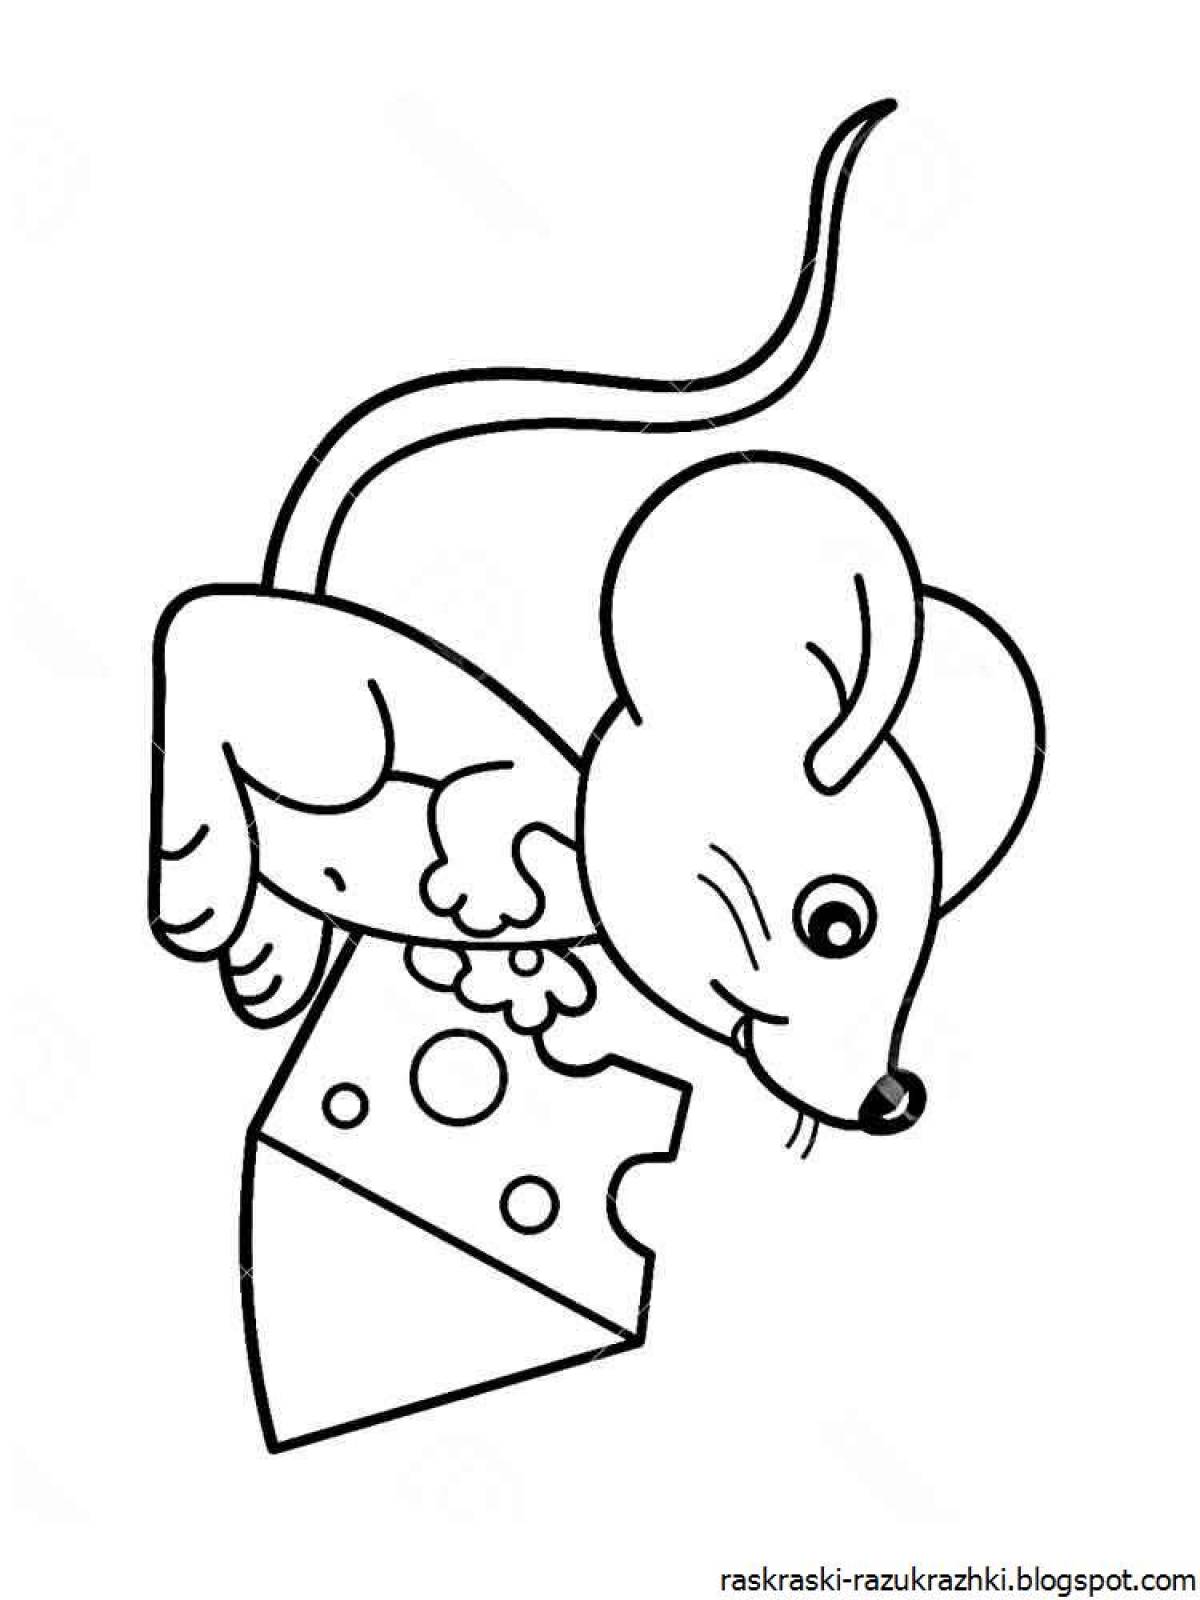 Live mouse coloring book for kids